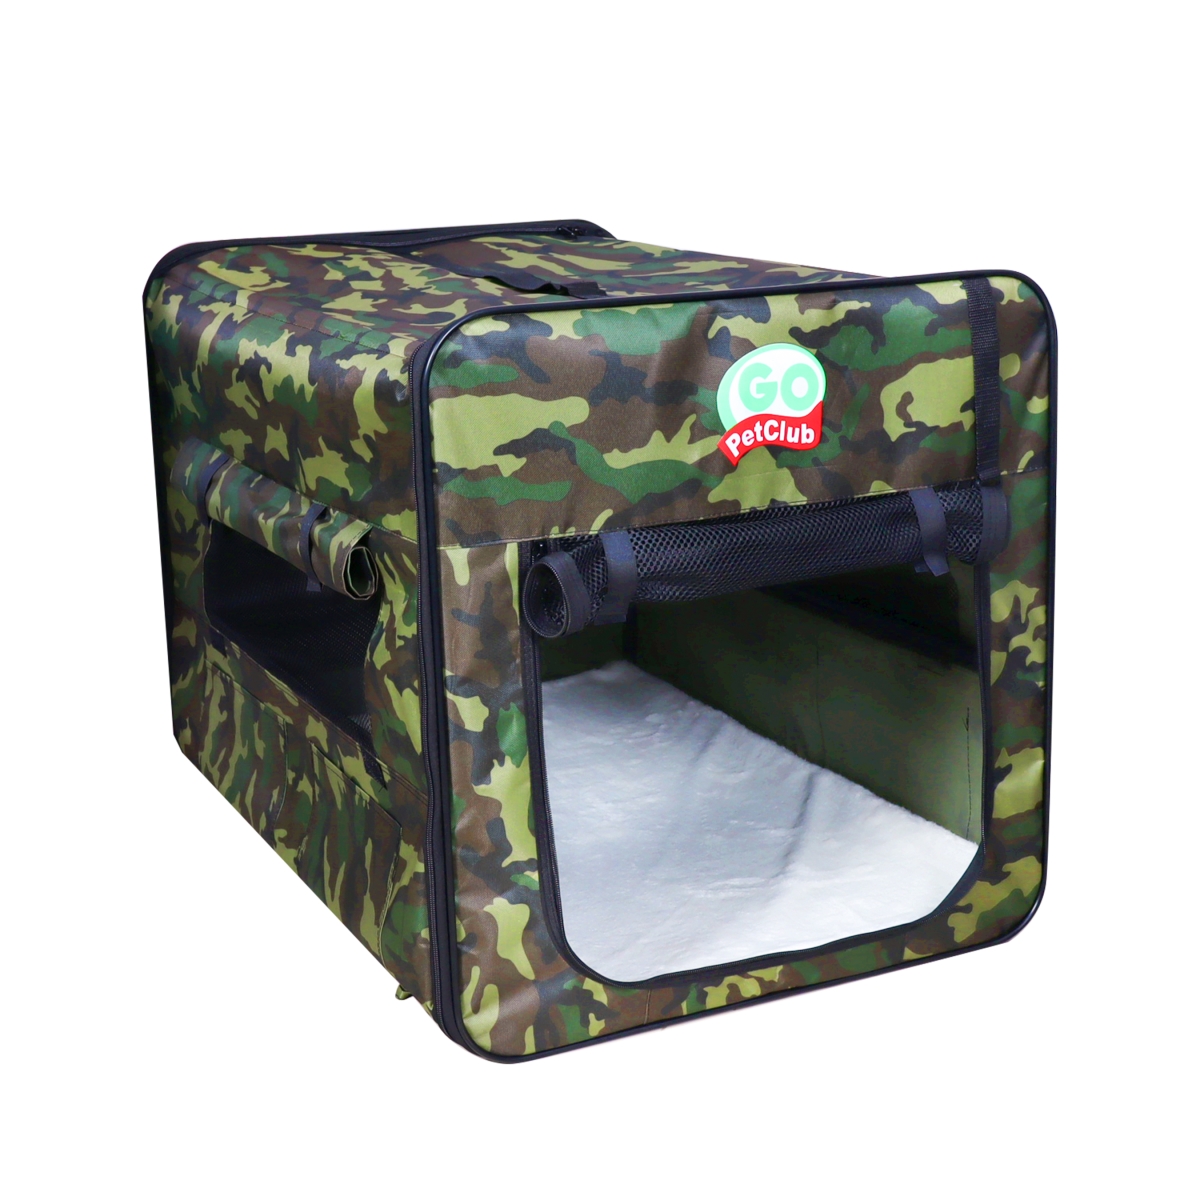 Picture of Go Pet Club AF43 Go Pet Club 43&apos; Soft Collapsible Dog Crate&#44; Portable Pet Carrier&#44; Thick Padded Pet Travel Crate for Indoor & Outdoor&#44; Foldable Kennel Cage with Durable Mesh Windows&#44; Forest Green Camo